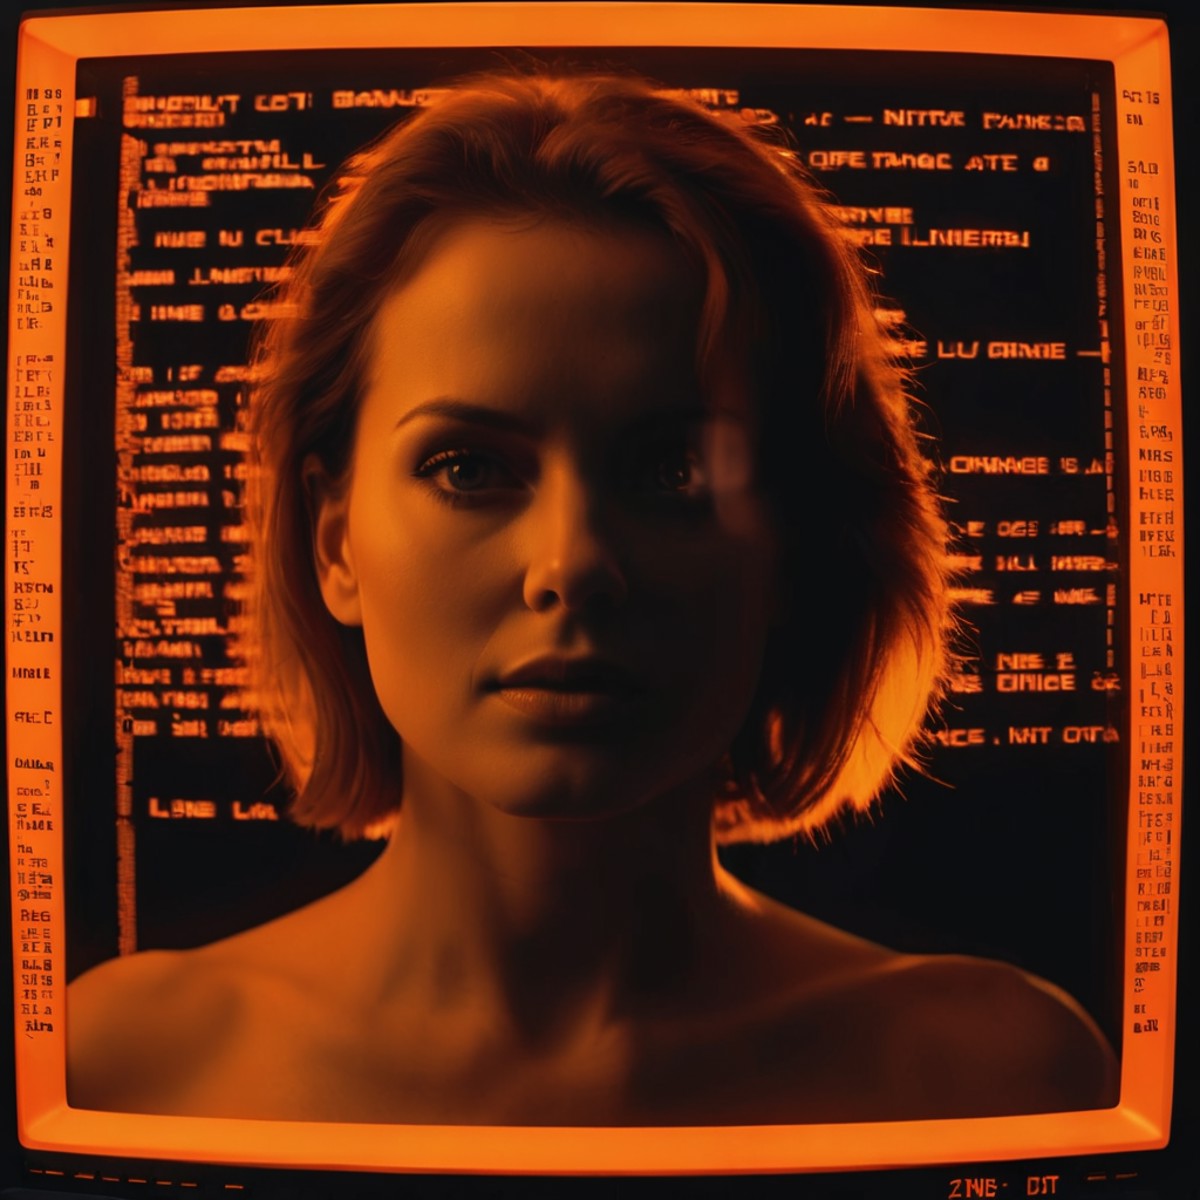 <lora:Retro-UI-XL-000009:1>, photo of beautiful woman made out of (Retro-UI computer screen with orange on black text), ci...